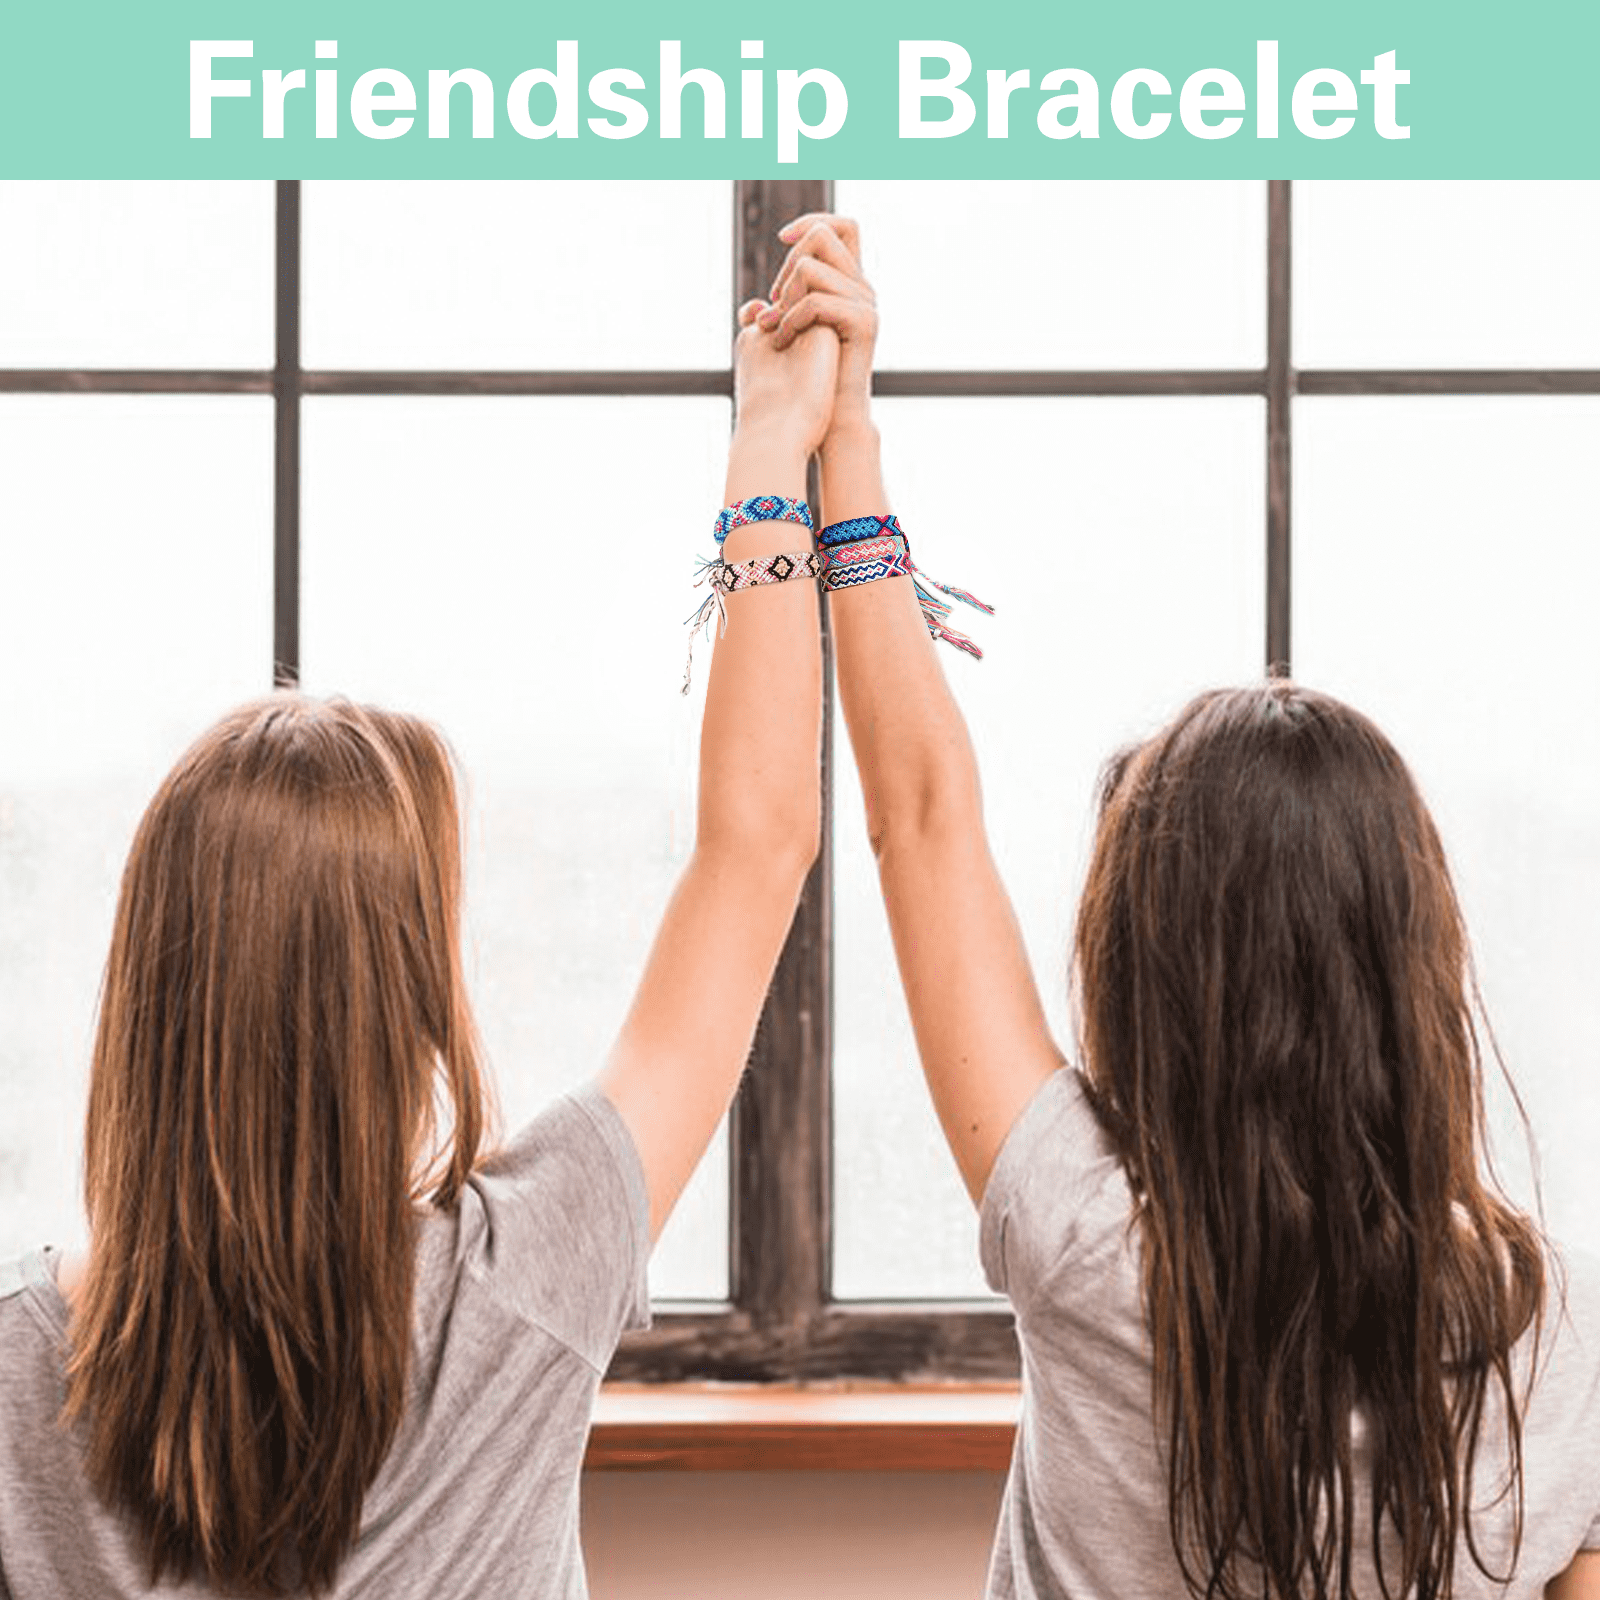 Friendship Bracelet Making Kit,Arts and Crafts for Kids Ages 8-12,DIY  Bracelet Making Kit with 20 Pre-Cut Threads,Birthday Gifts for Girl Aged 6  7 8 9 10 11 12 Year Old Child Travel Activity Set 